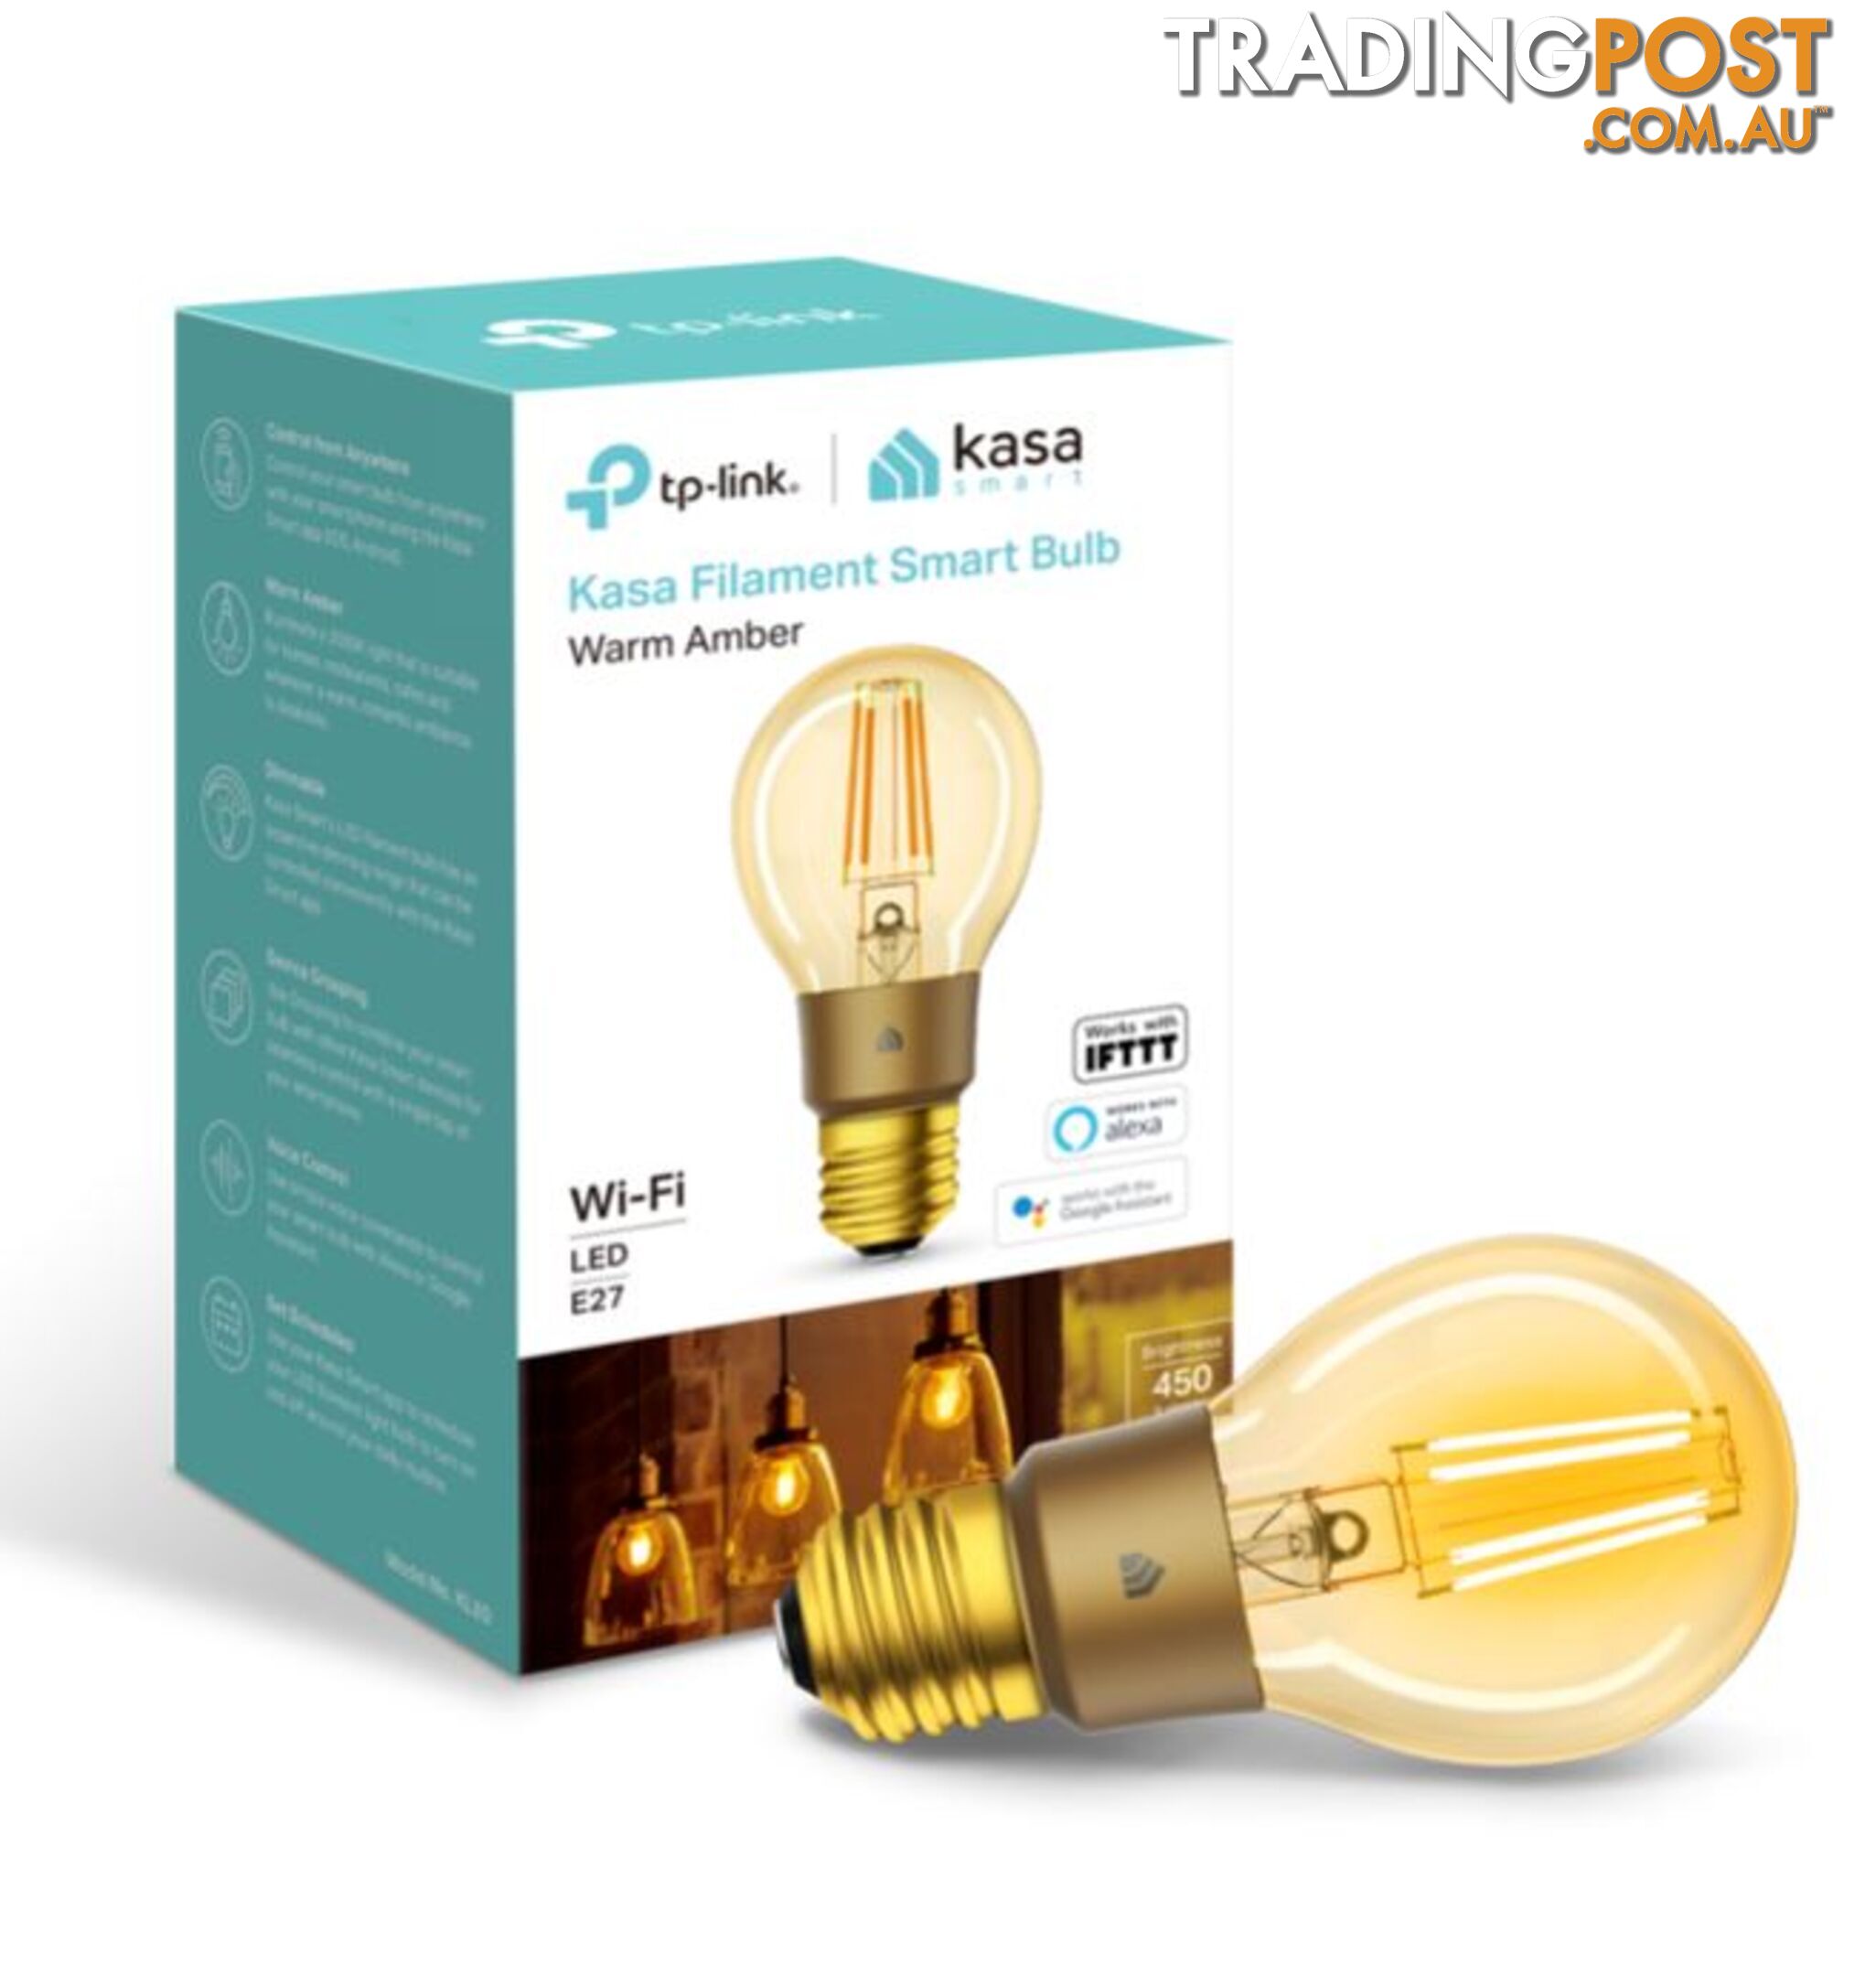 TP-Link KL60 Kasa Filament Smart Bulb, Warm Amber, Edison Screw, Dimmable, No Hub Required, Voice Control, 2000K, 5kWh/1000h, 2.4 GHz, 2 Year Warranty - HETL-KL60